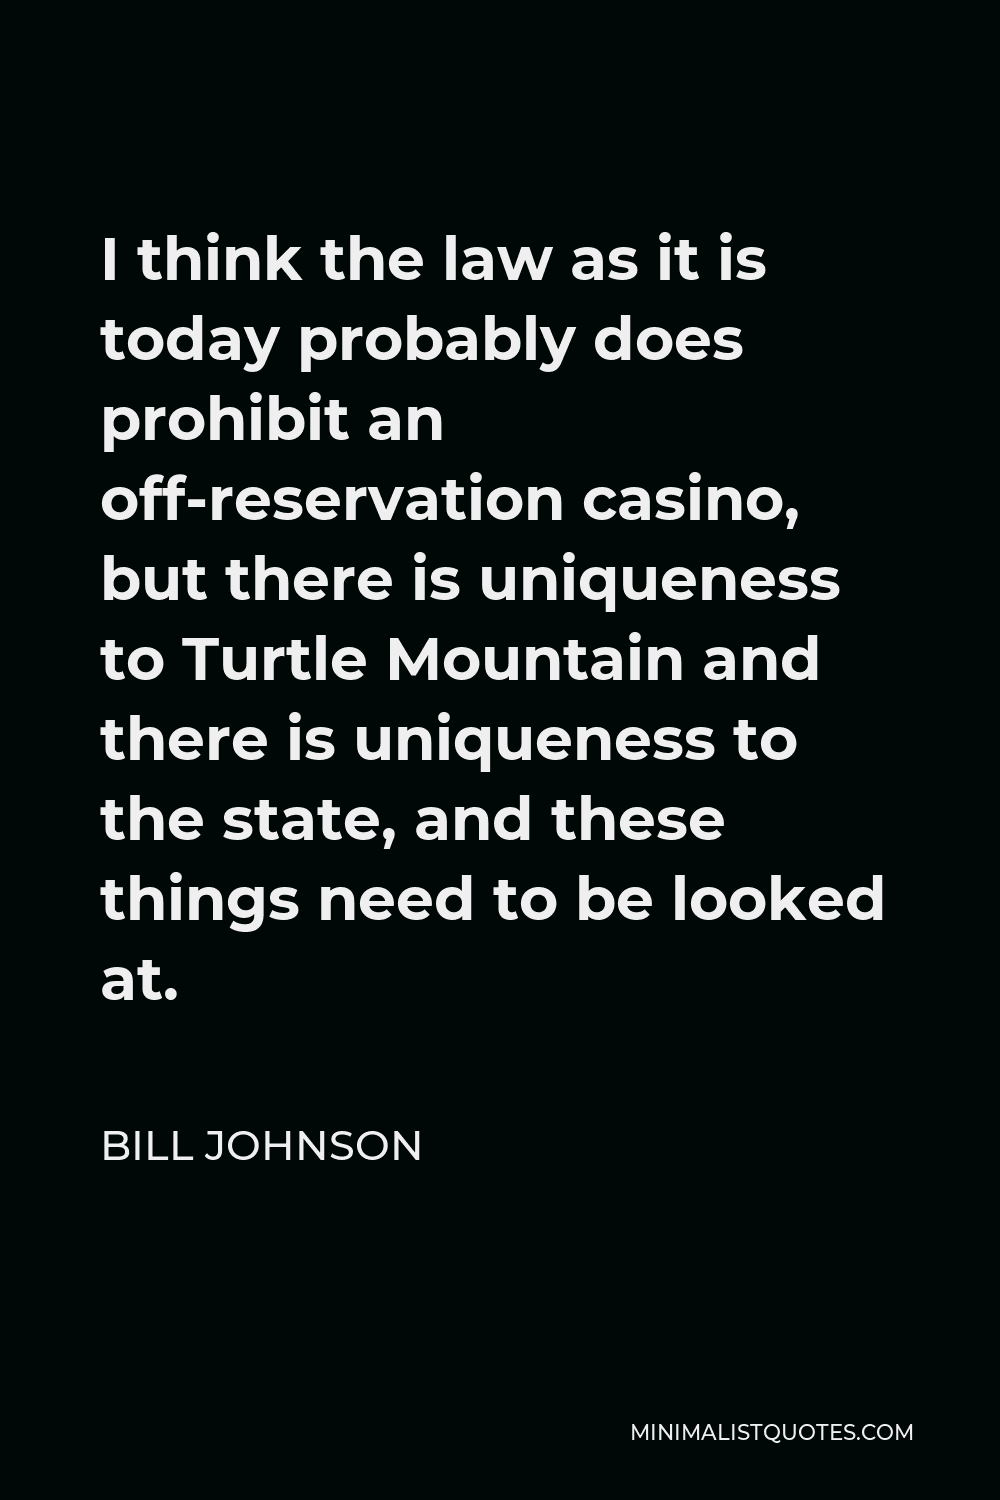 Bill Johnson Quote - I think the law as it is today probably does prohibit an off-reservation casino, but there is uniqueness to Turtle Mountain and there is uniqueness to the state, and these things need to be looked at.